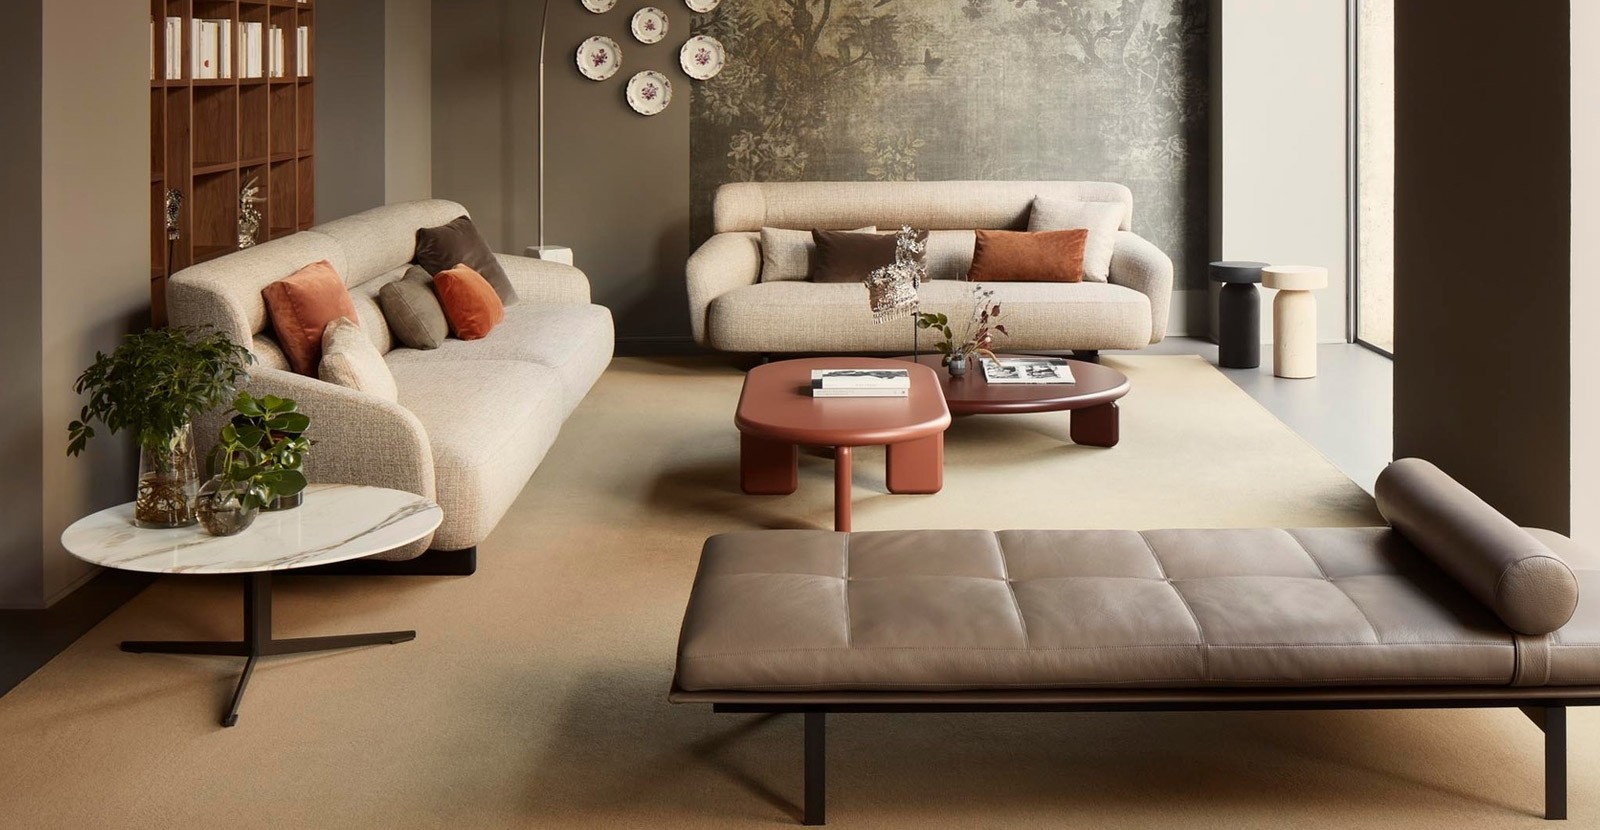 Lema Mobili: the best solution for custom furniture